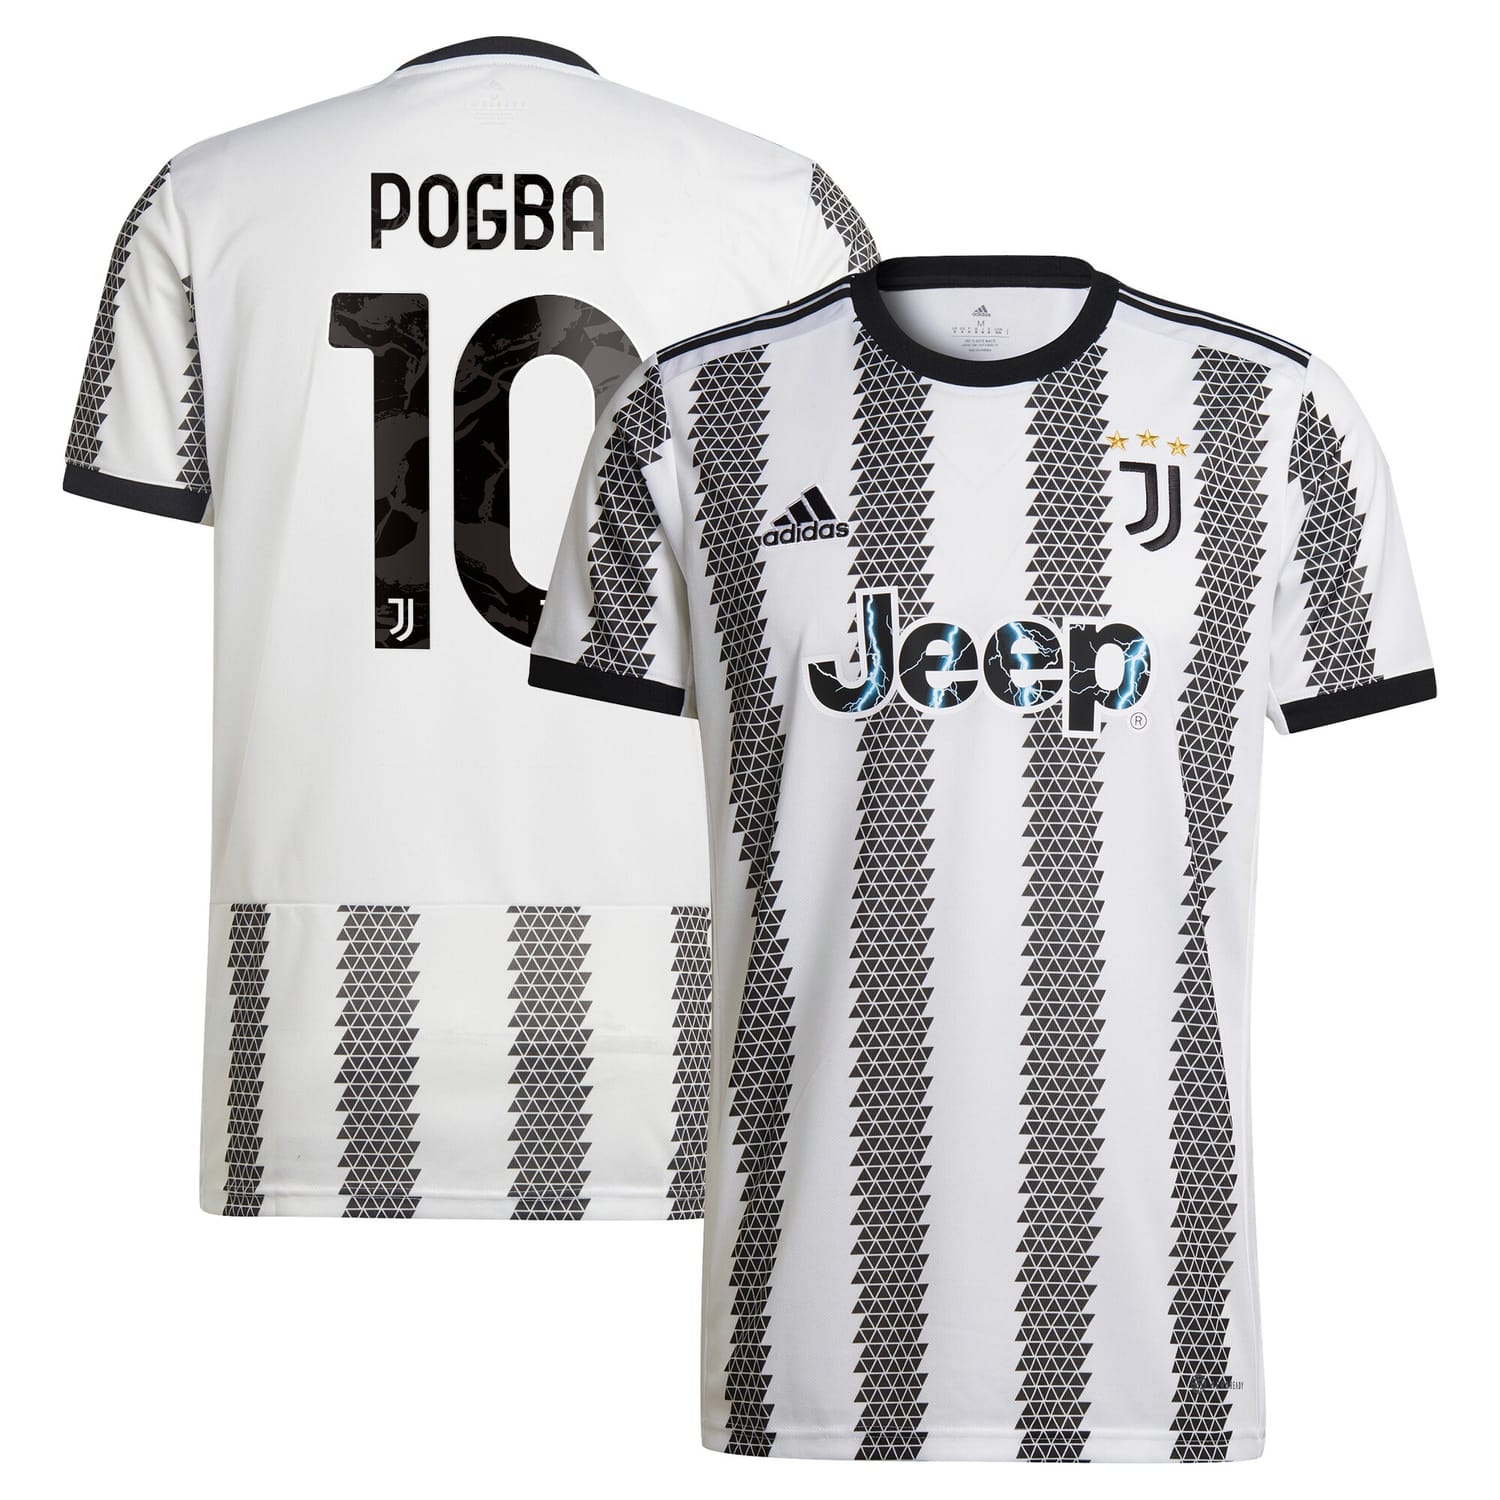 Serie A Juventus Home Jersey Shirt 2022-23 player Paul Pogba 10 printing for Men